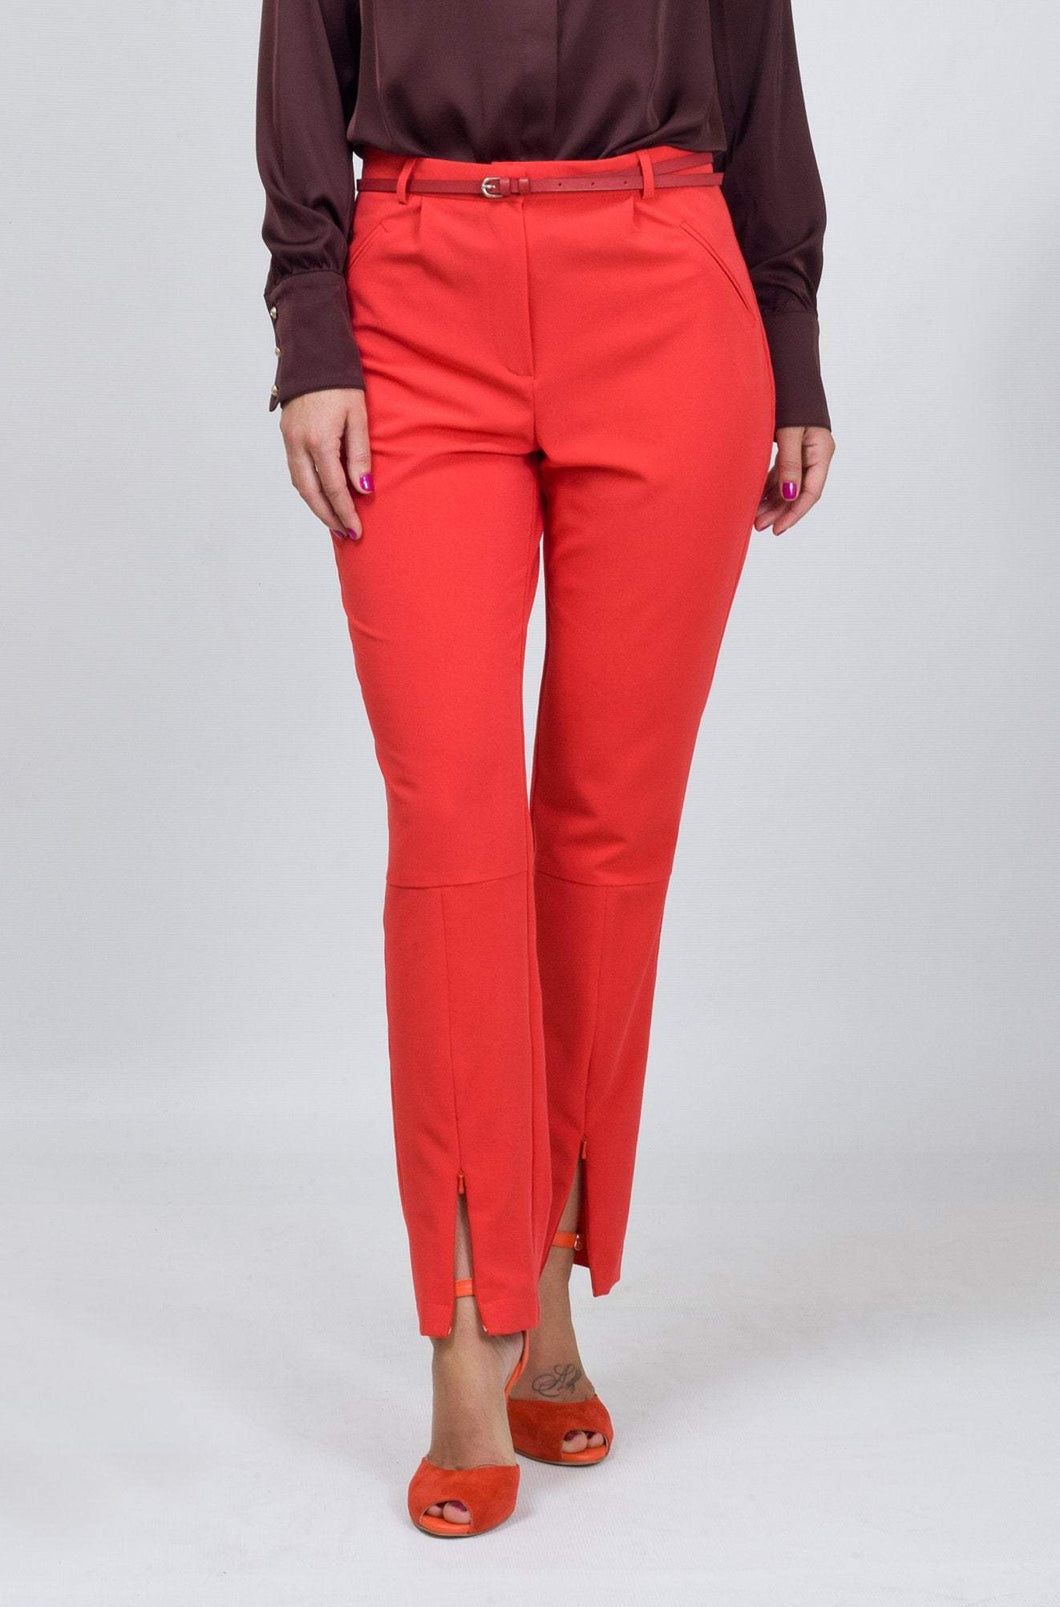 High waisted red pants